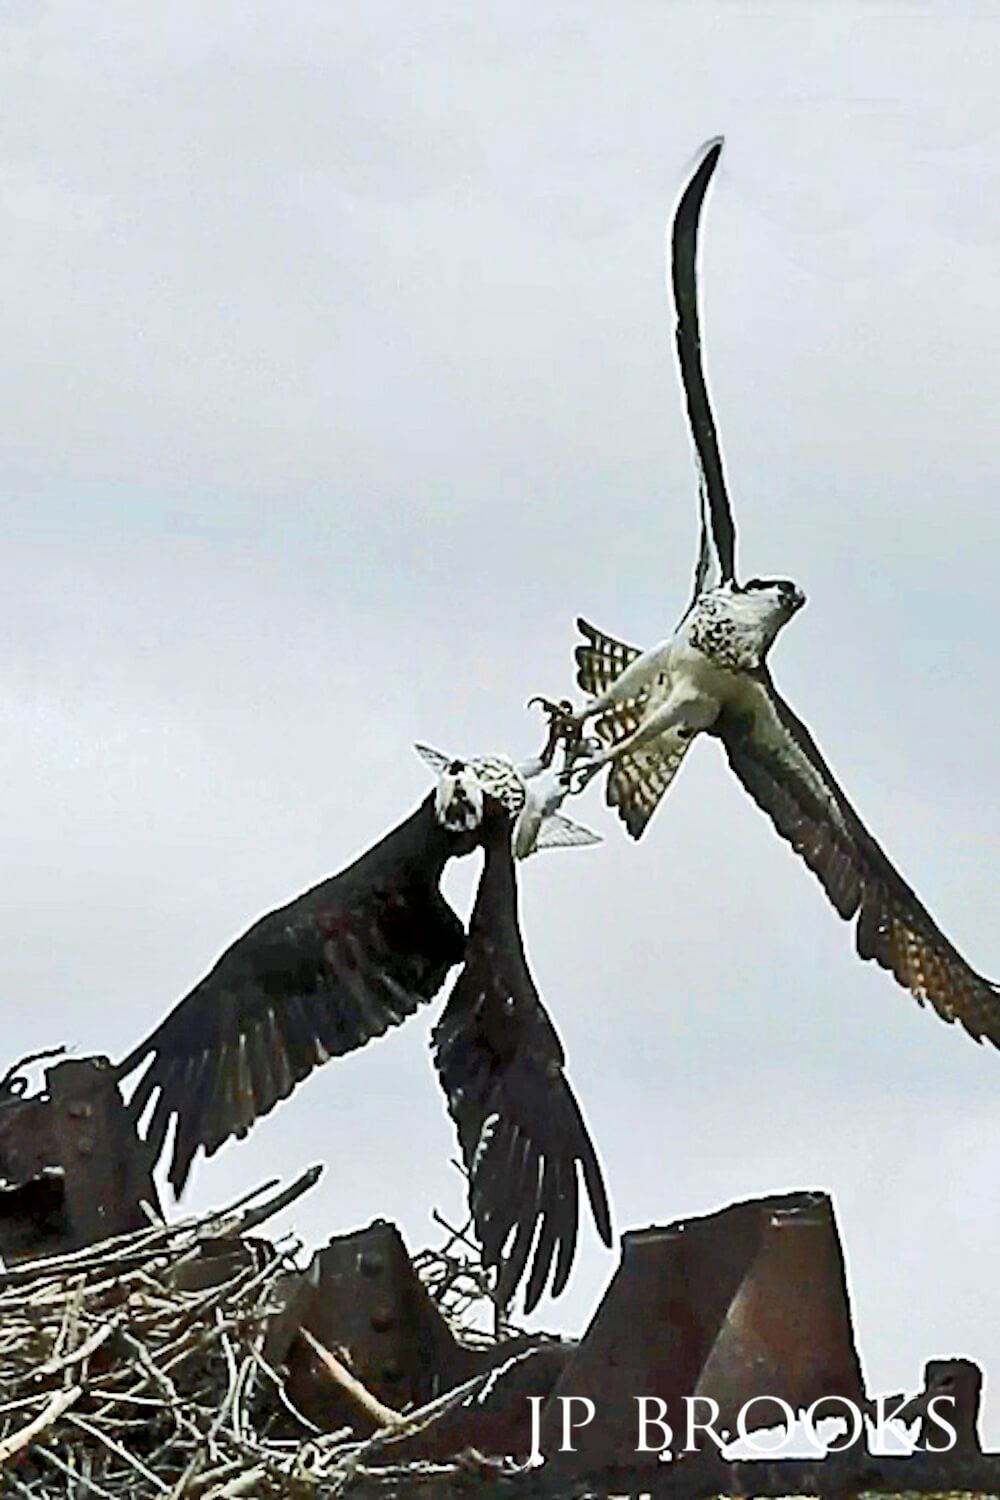 Osprey fiercely defending its nest from an intruder, with the two birds' talons locked in a heated battle.